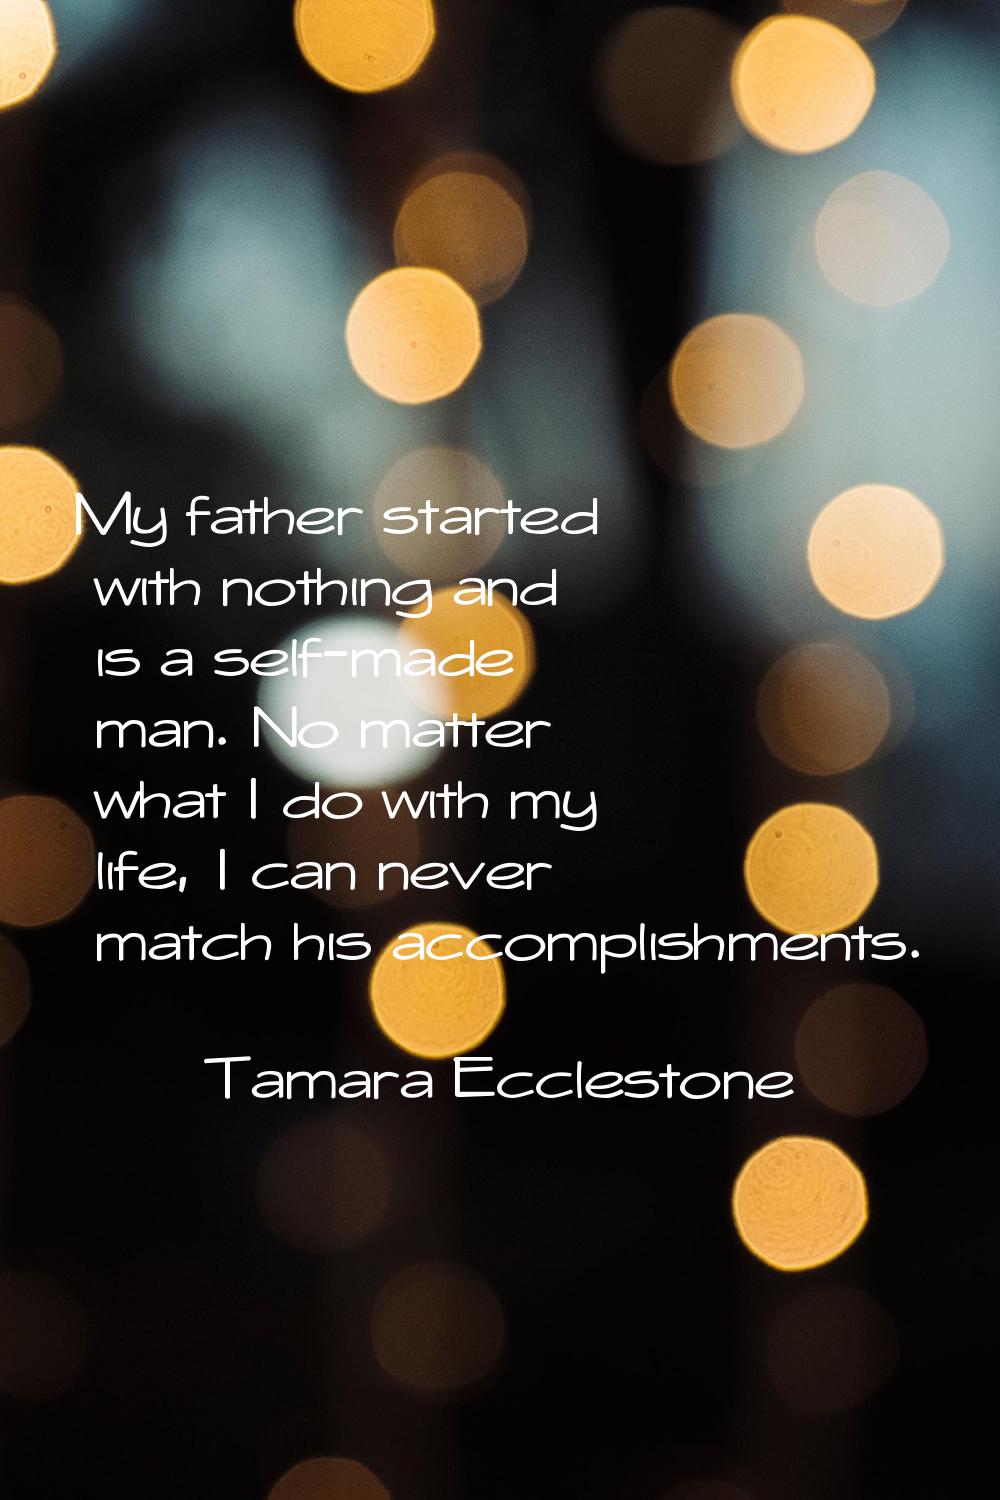 My father started with nothing and is a self-made man. No matter what I do with my life, I can neve